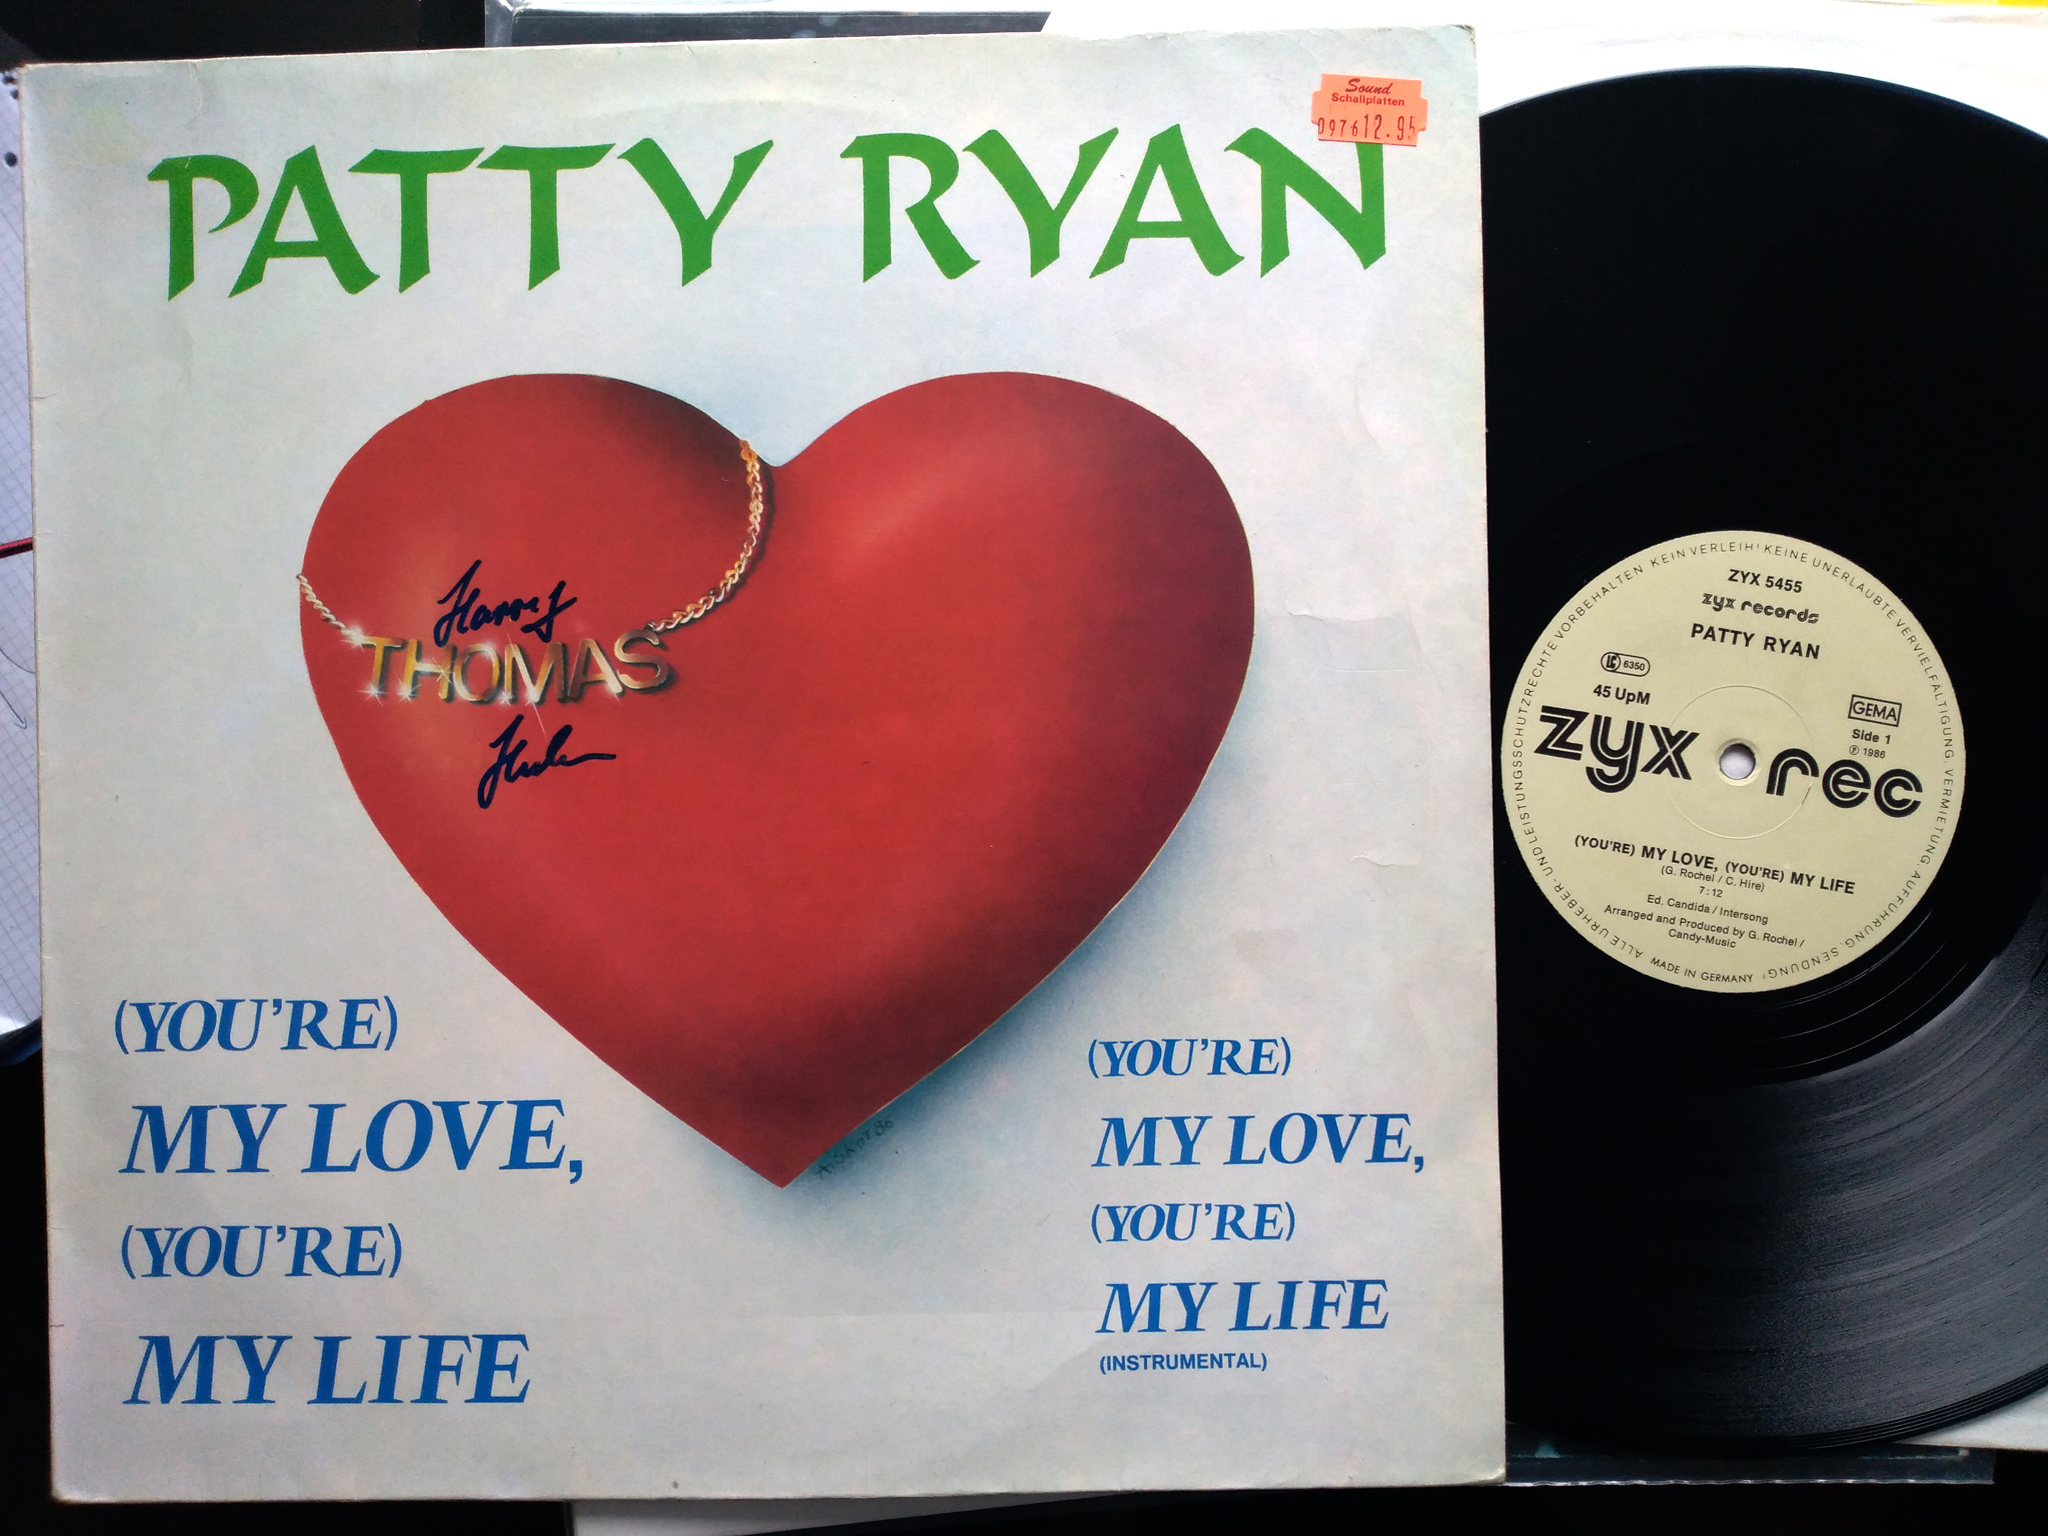 Patty Ryan - You're My Love, You're My Life